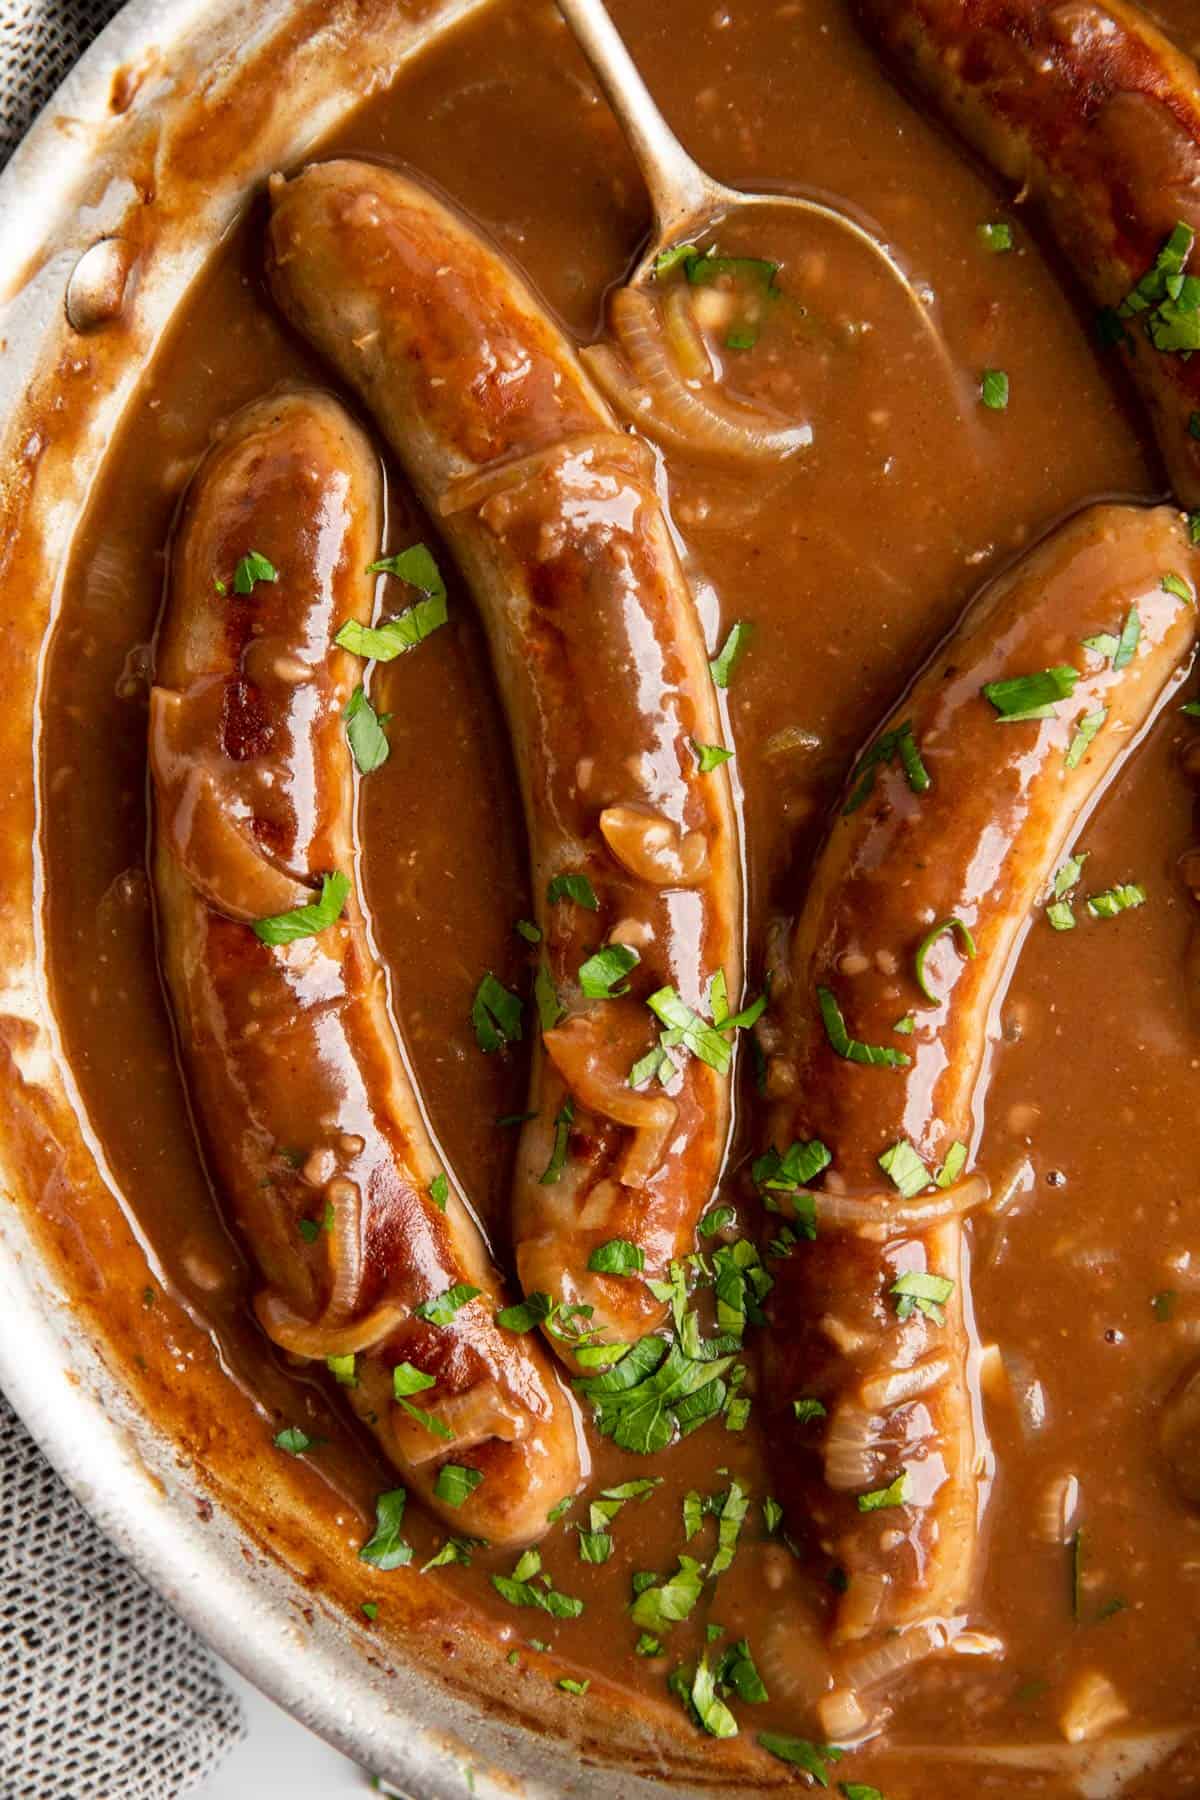 Evenly Browned Sausages? - Cookware - Hungry Onion